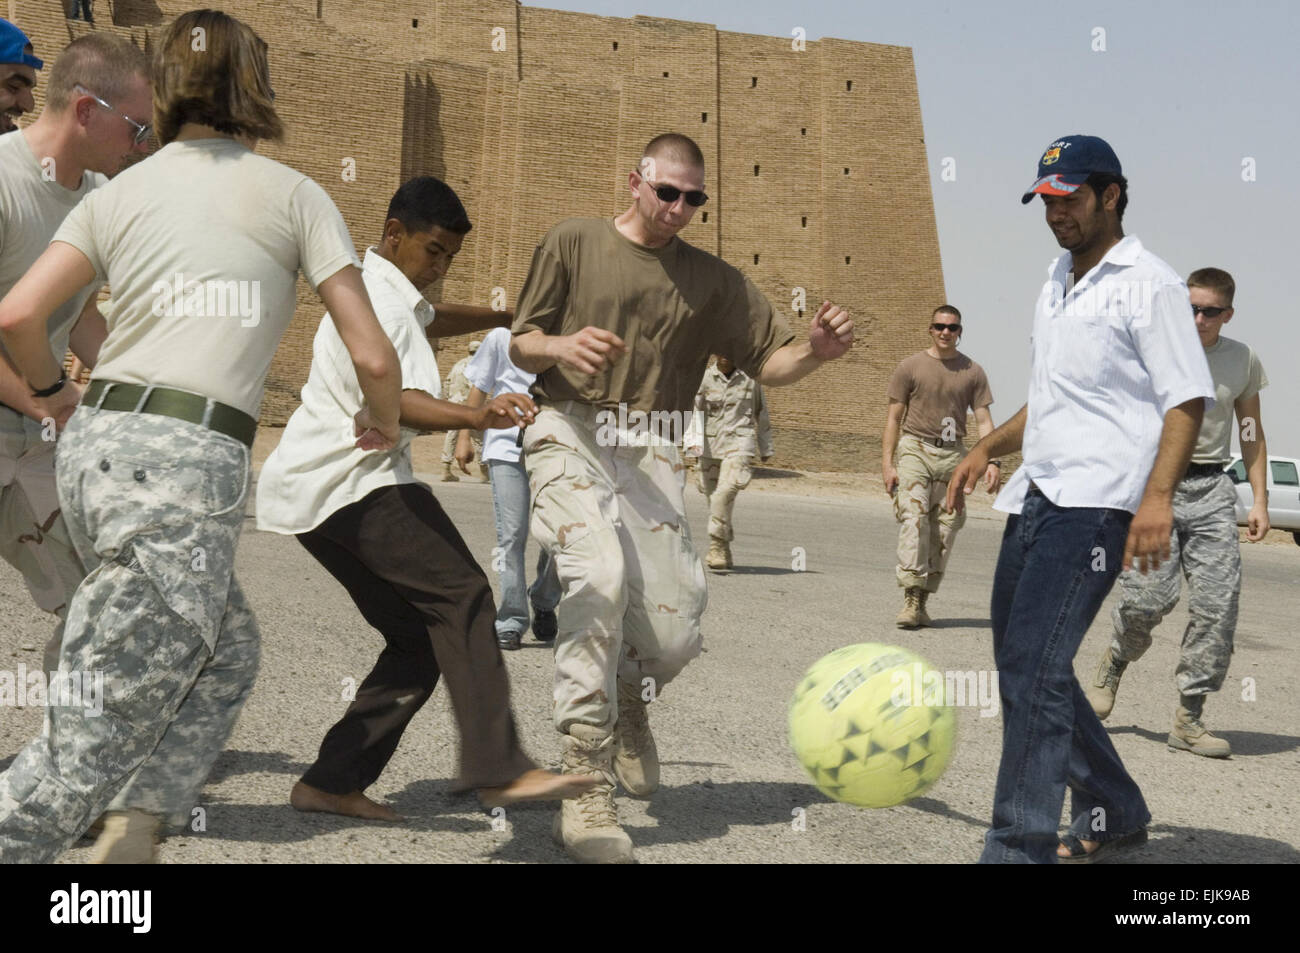 U.S. Air Force Airmen, U.S. Army Soldiers and local Iraqi citizens play soccer during a visit to a historical ziggurat located on Ali Air Base, Iraq, Aug. 21, 2007.  Master Sgt. Robert W. Valenca Stock Photo